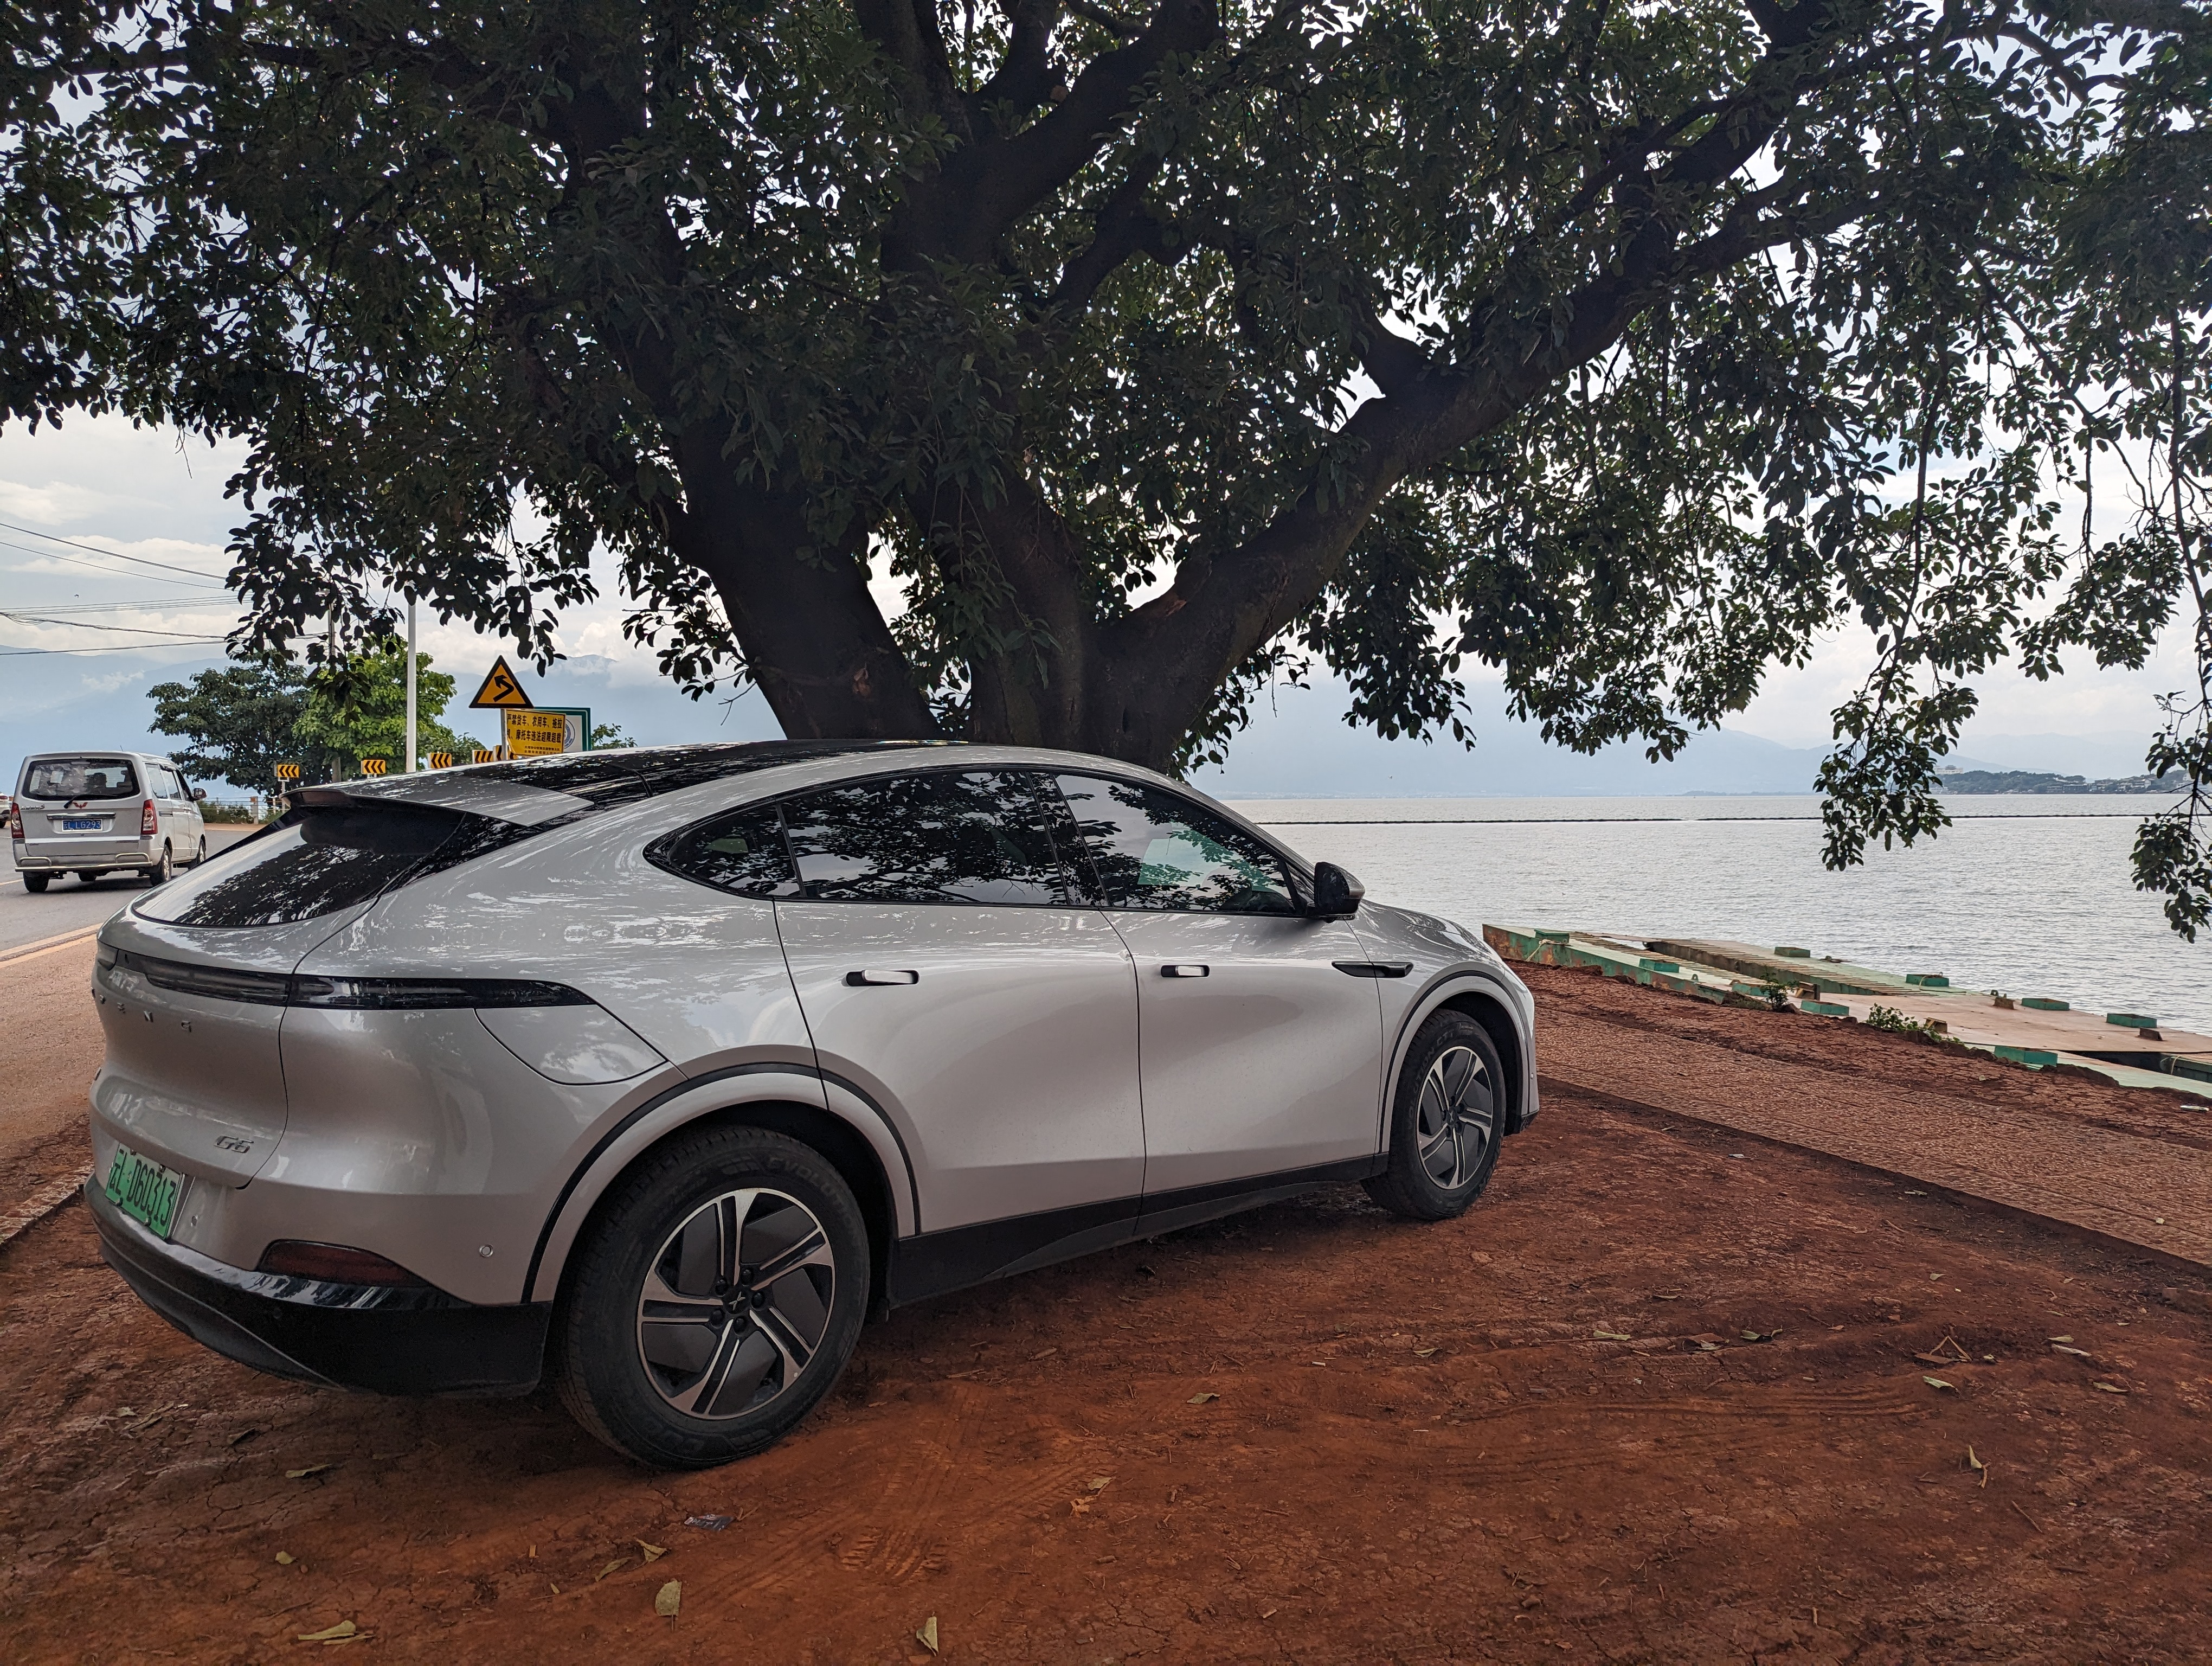 Xpeng G6 relaxing by the water under a tree